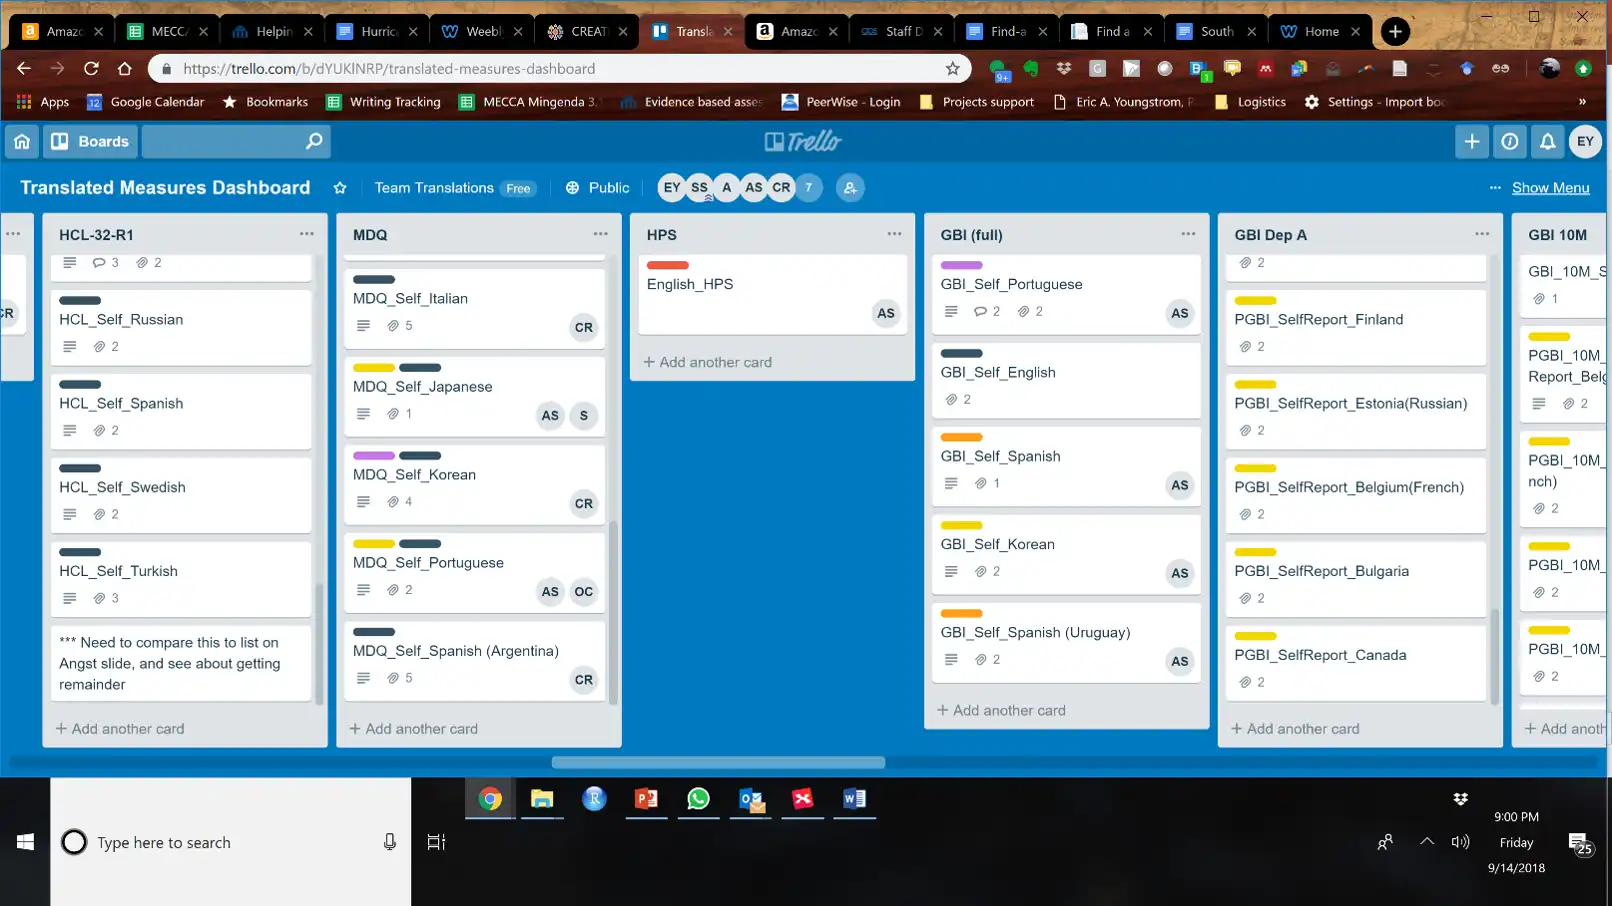 Trello_dashboard_of_translated_versions_of_best_validated_free_measures_of_emotion,_mood,_and_anxiety